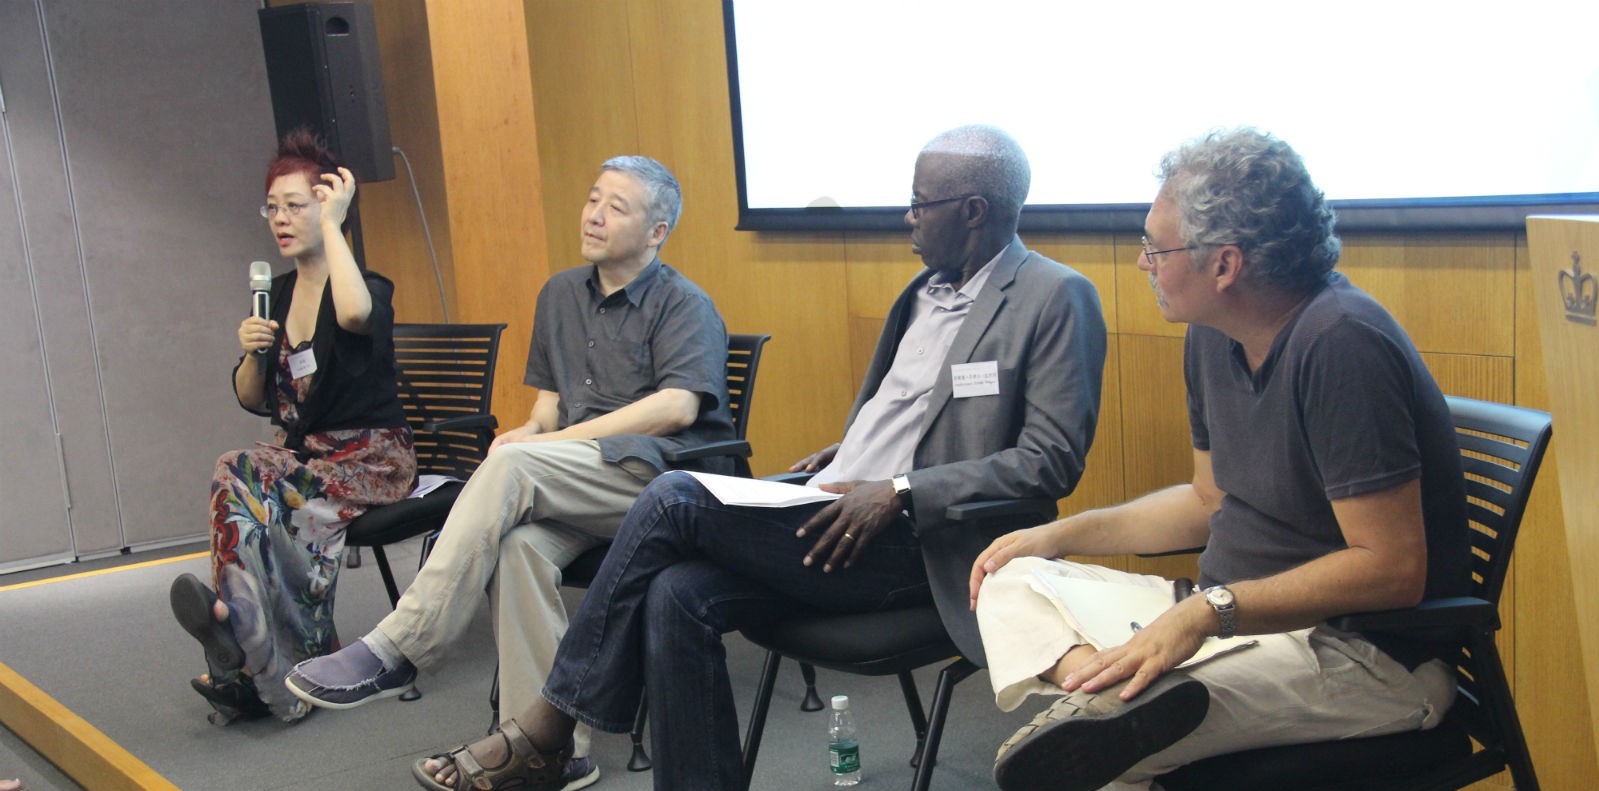 Professor Lydia H. Liu and ICLS faculty lead discussions on Bandung spirit and reflections on Afro-Asian solidarity